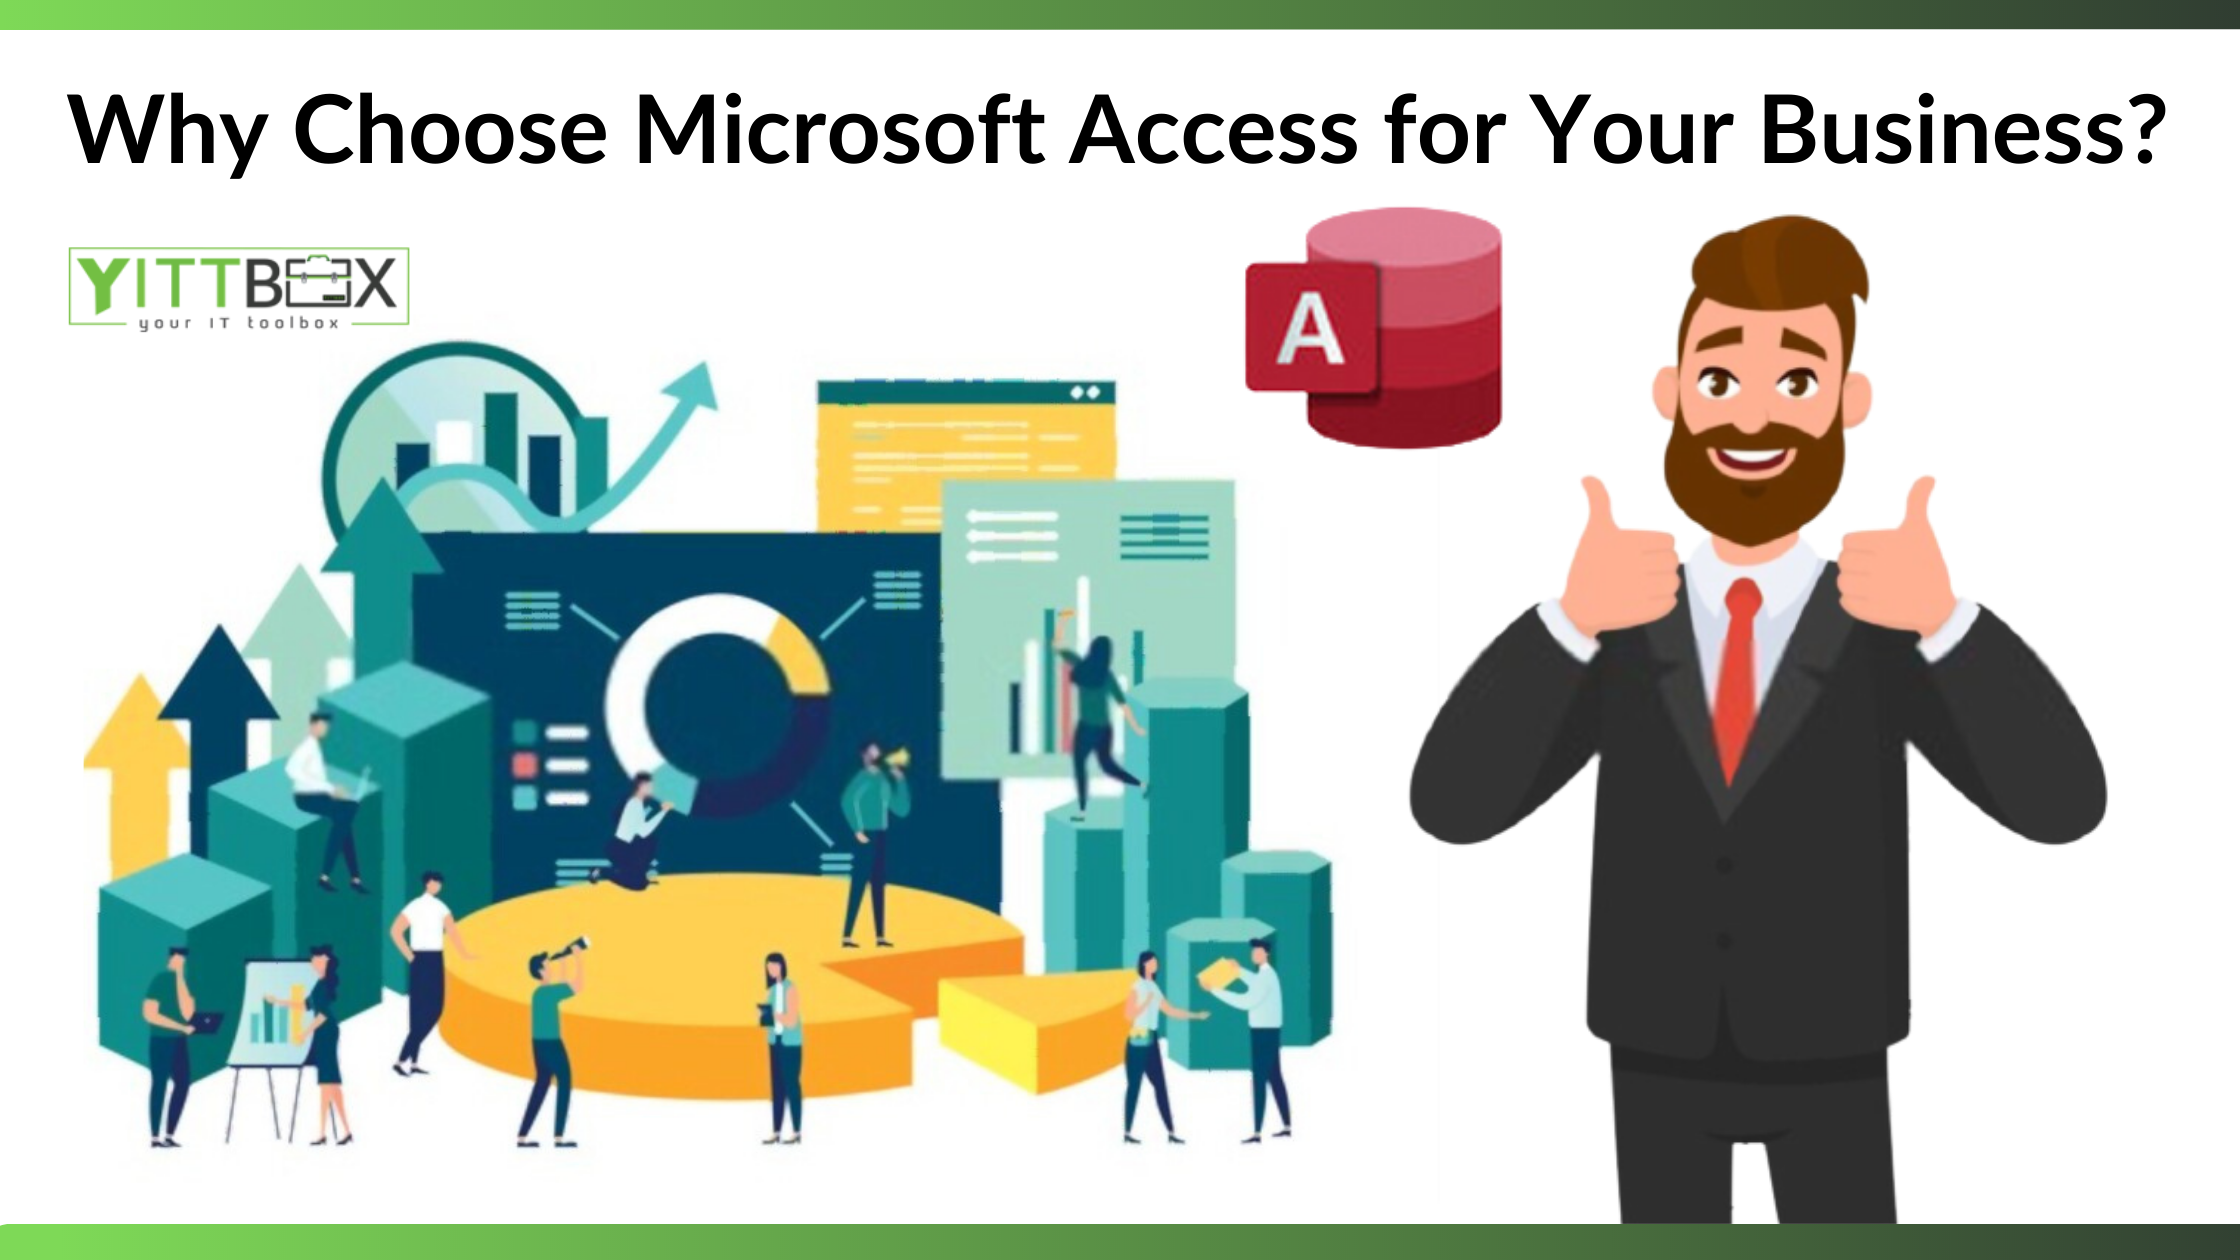 Why Choose Microsoft Access for Business